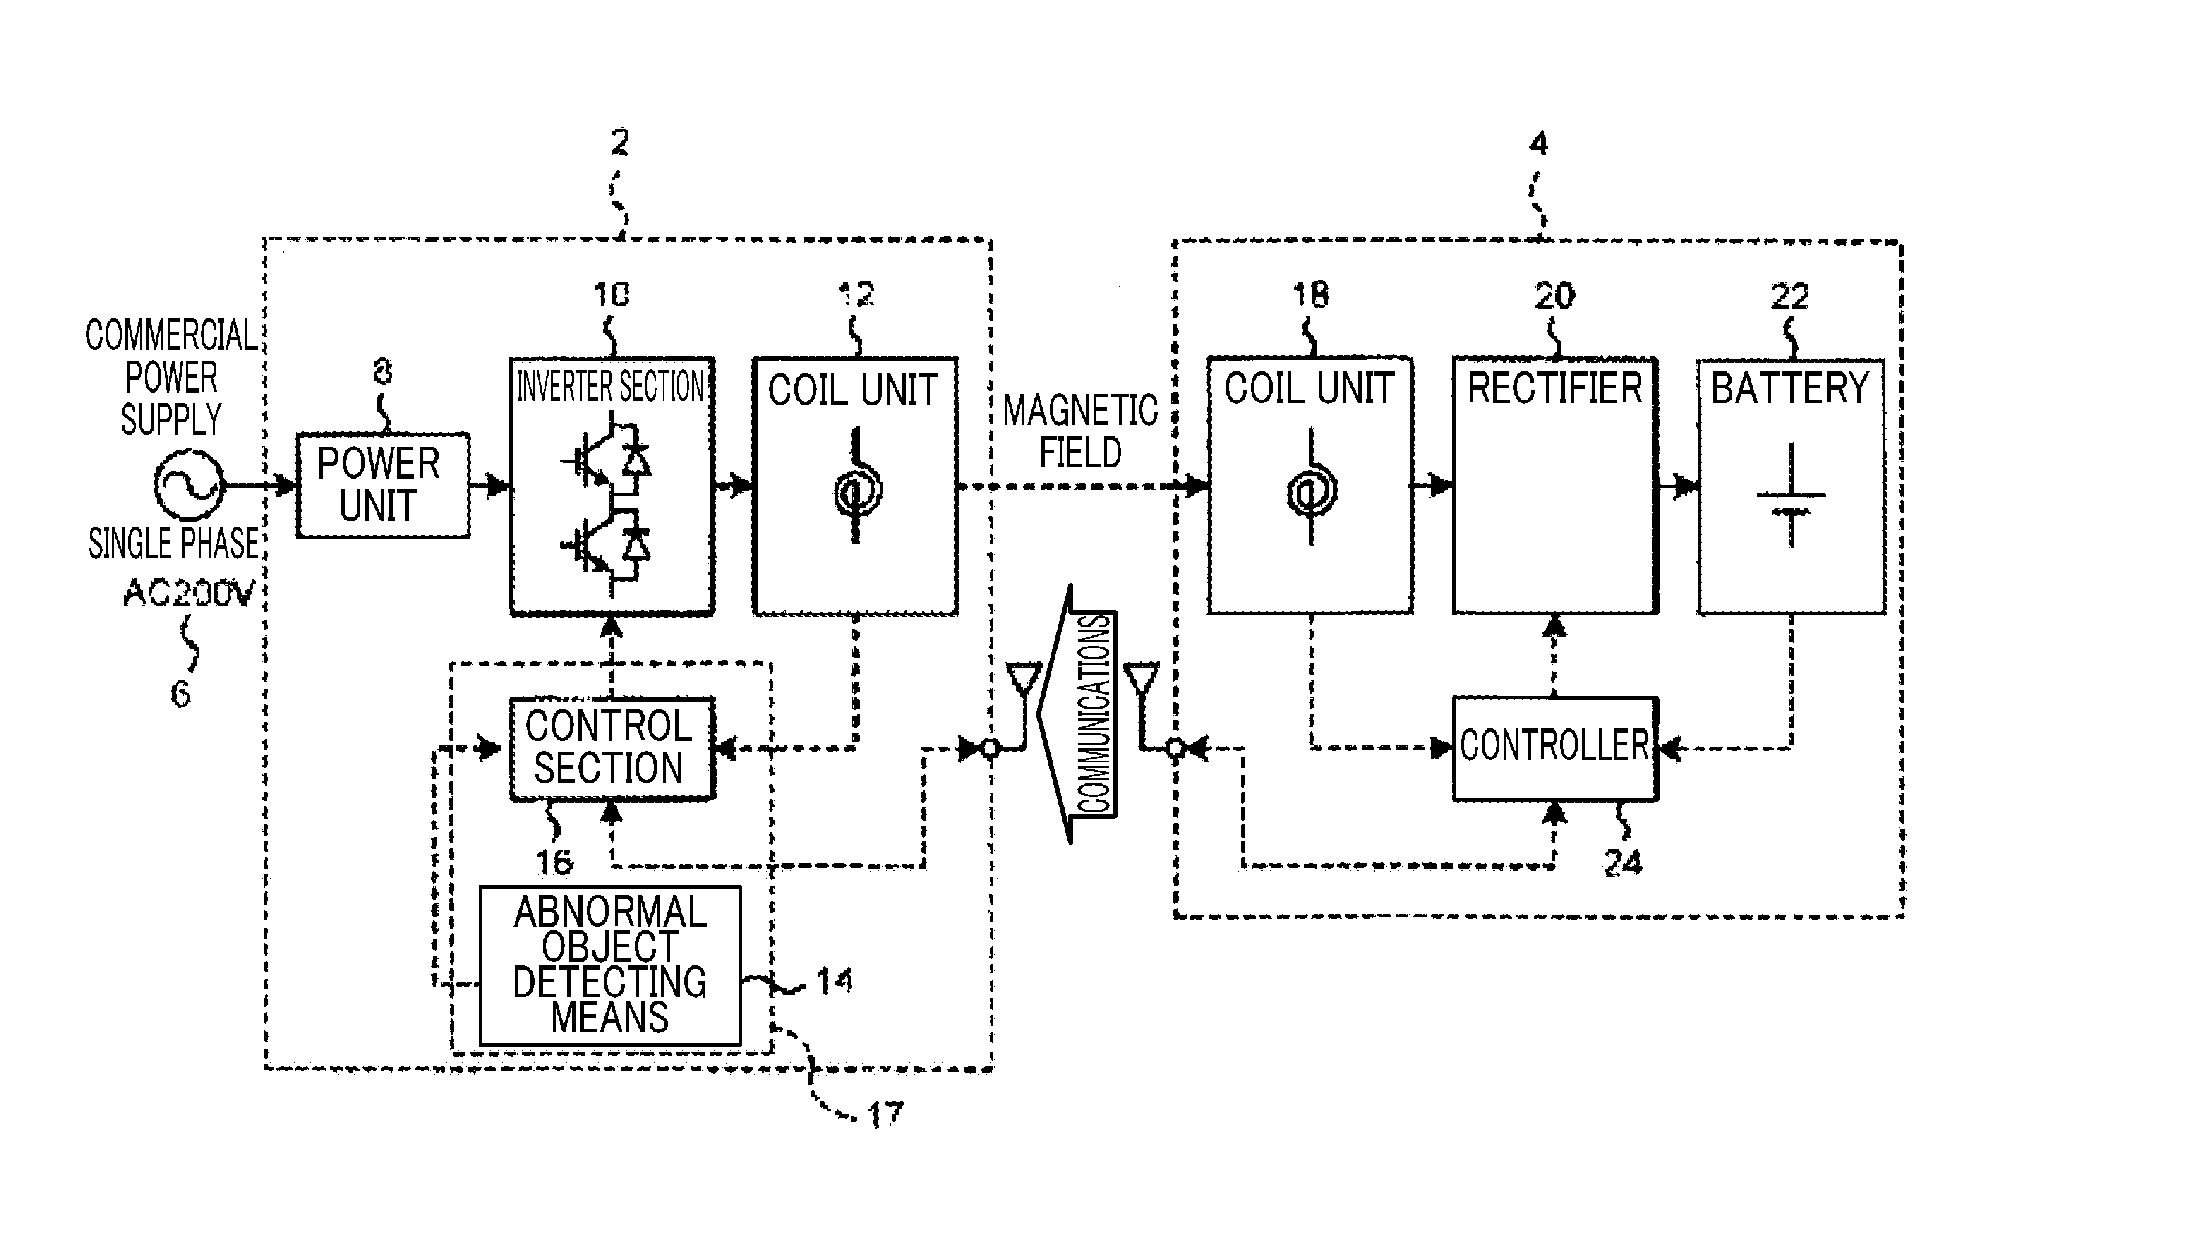 Non-contact power transmission system